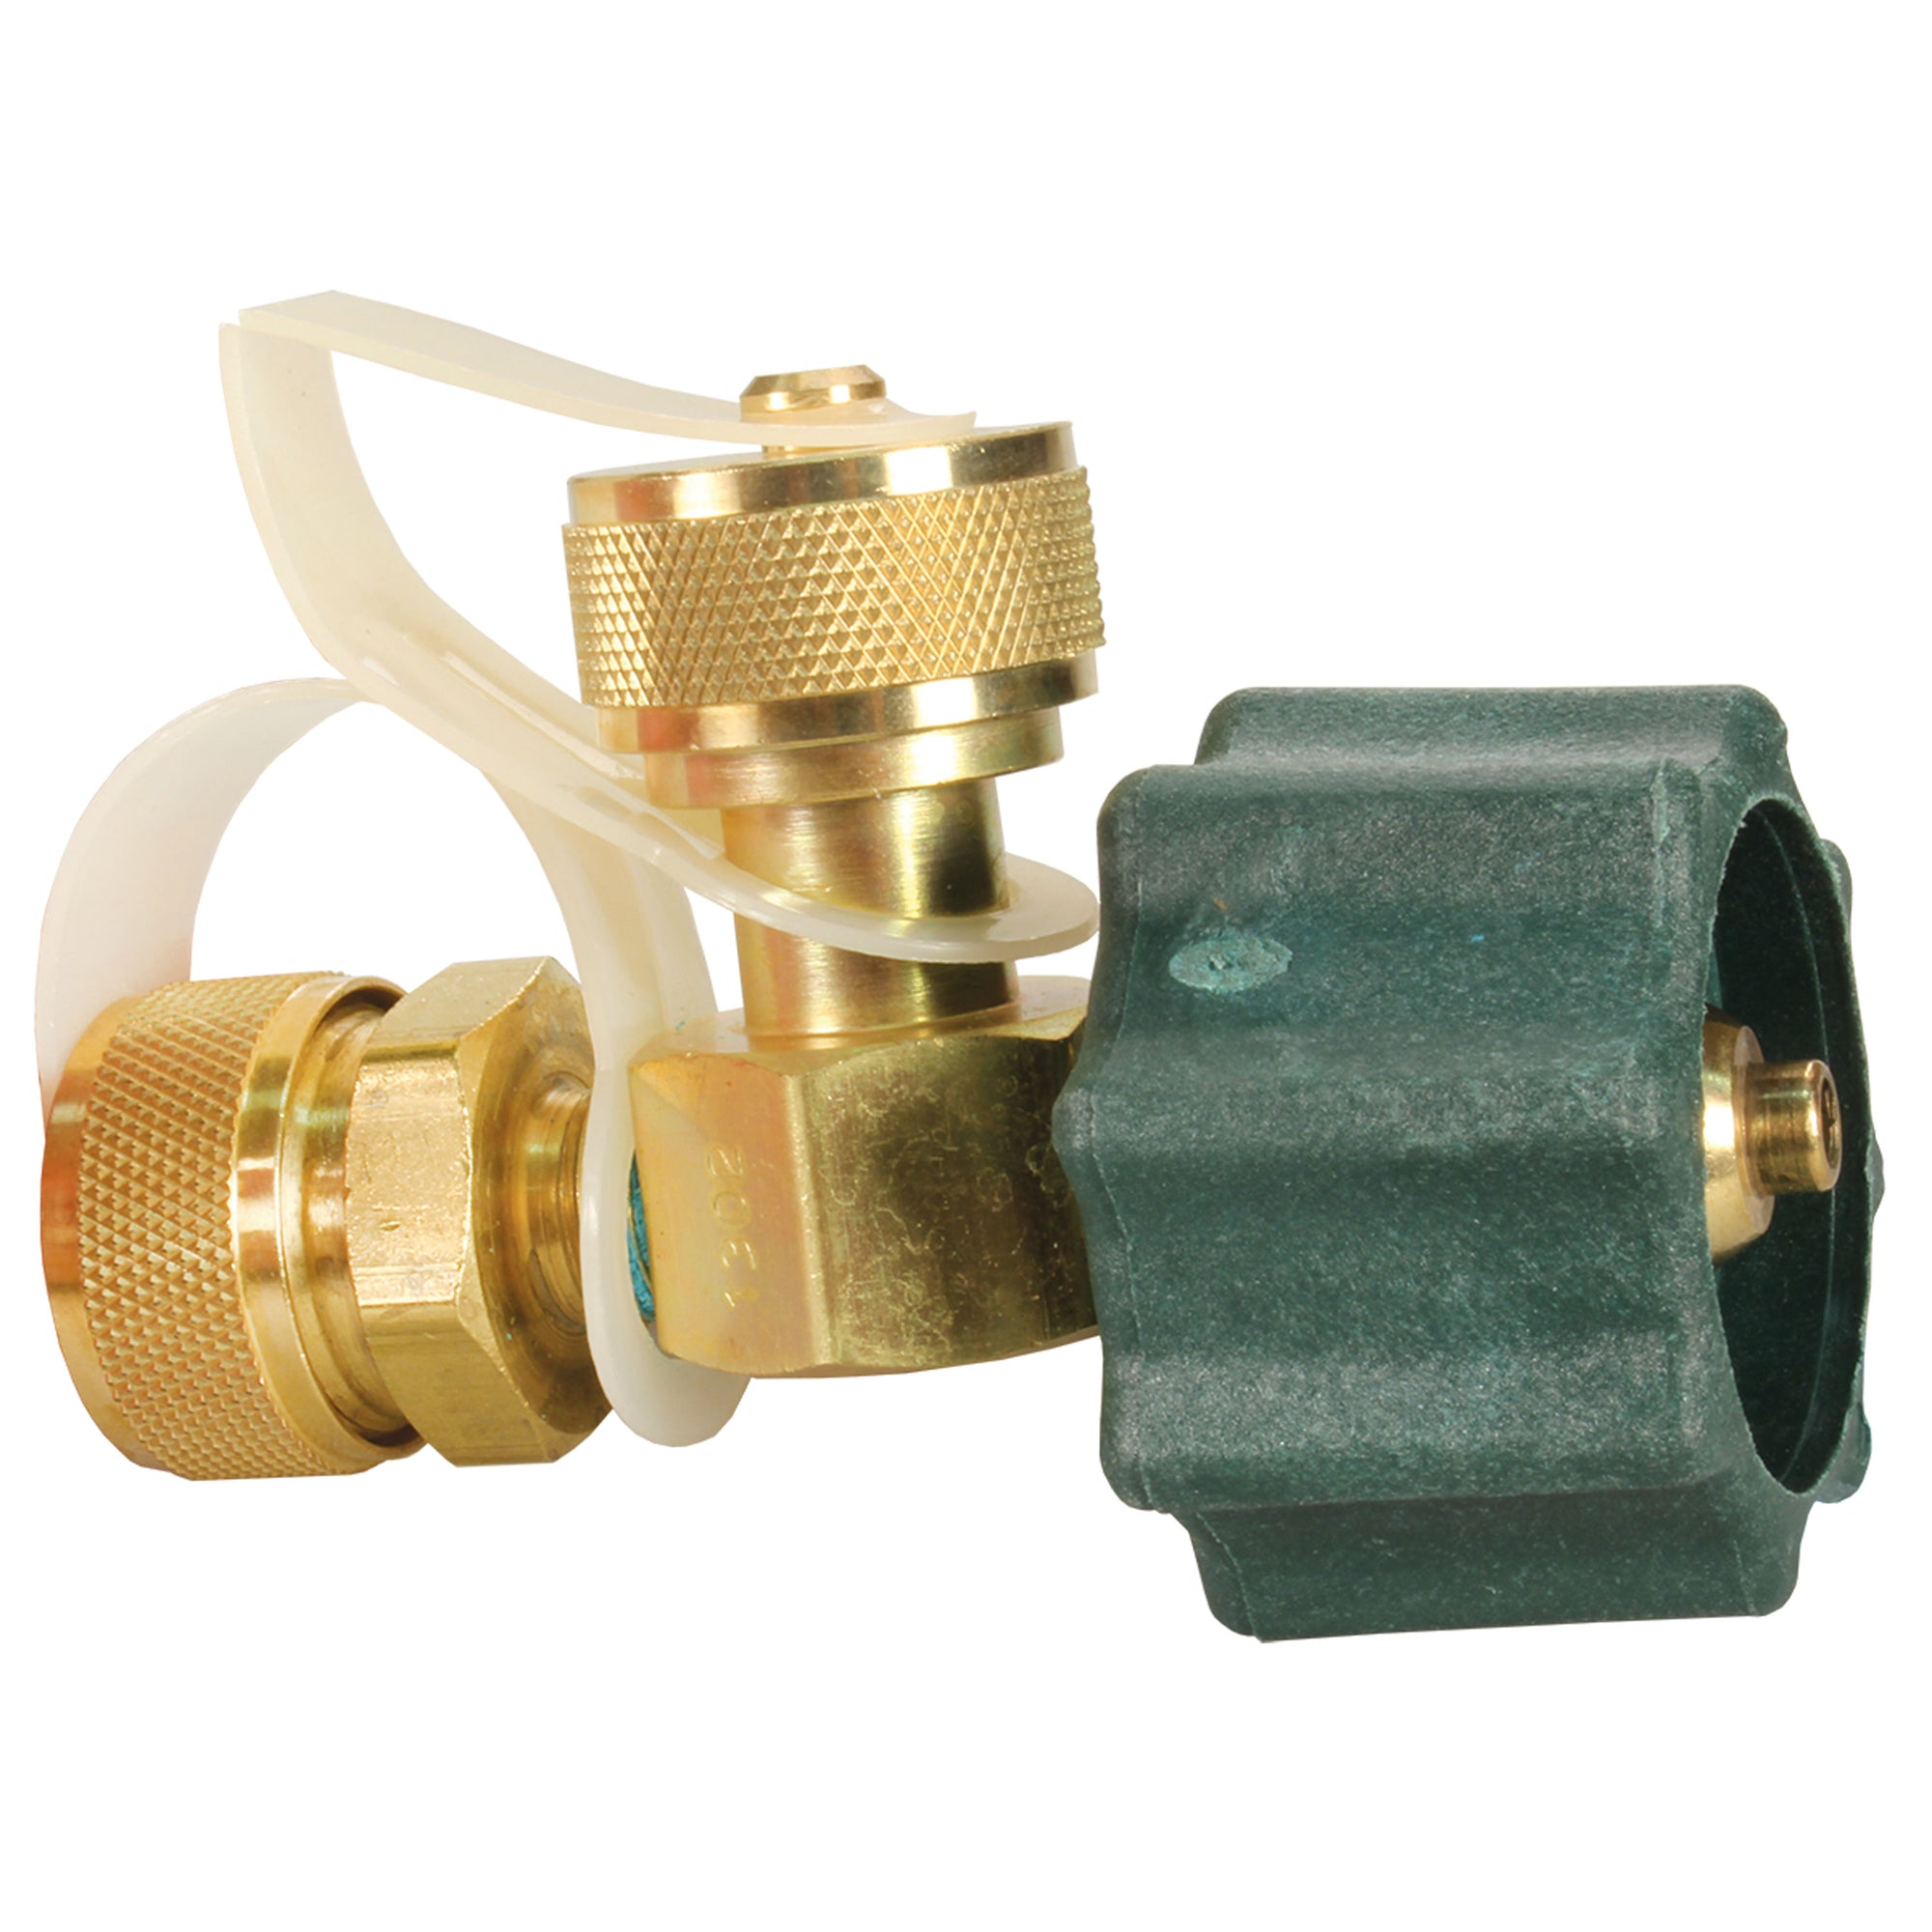 JR Products 07-30115 Propane Branch Tee - Male QC x (2) Male 1"-20 Cylinder Thread